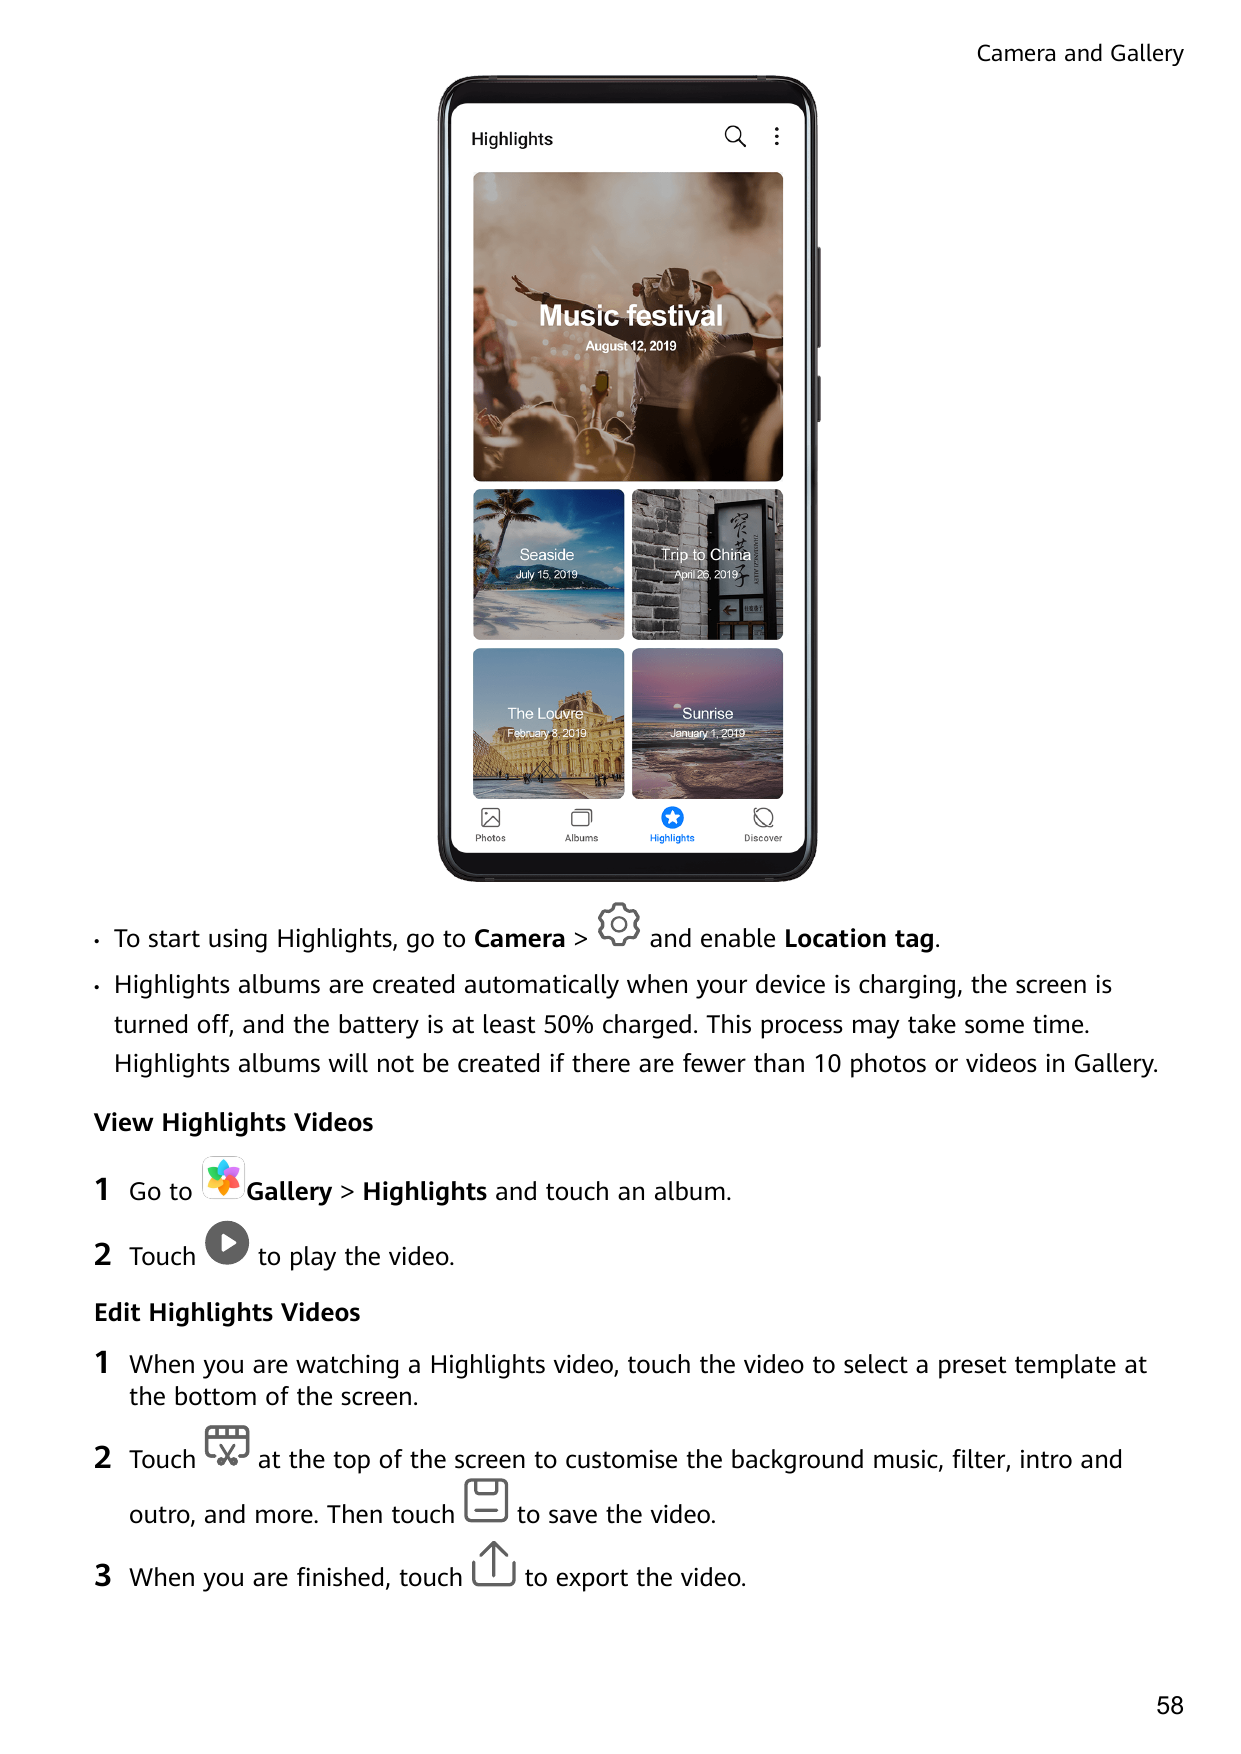 Camera and Gallery•To start using Highlights, go to Camera >and enable Location tag.•Highlights albums are created automatically